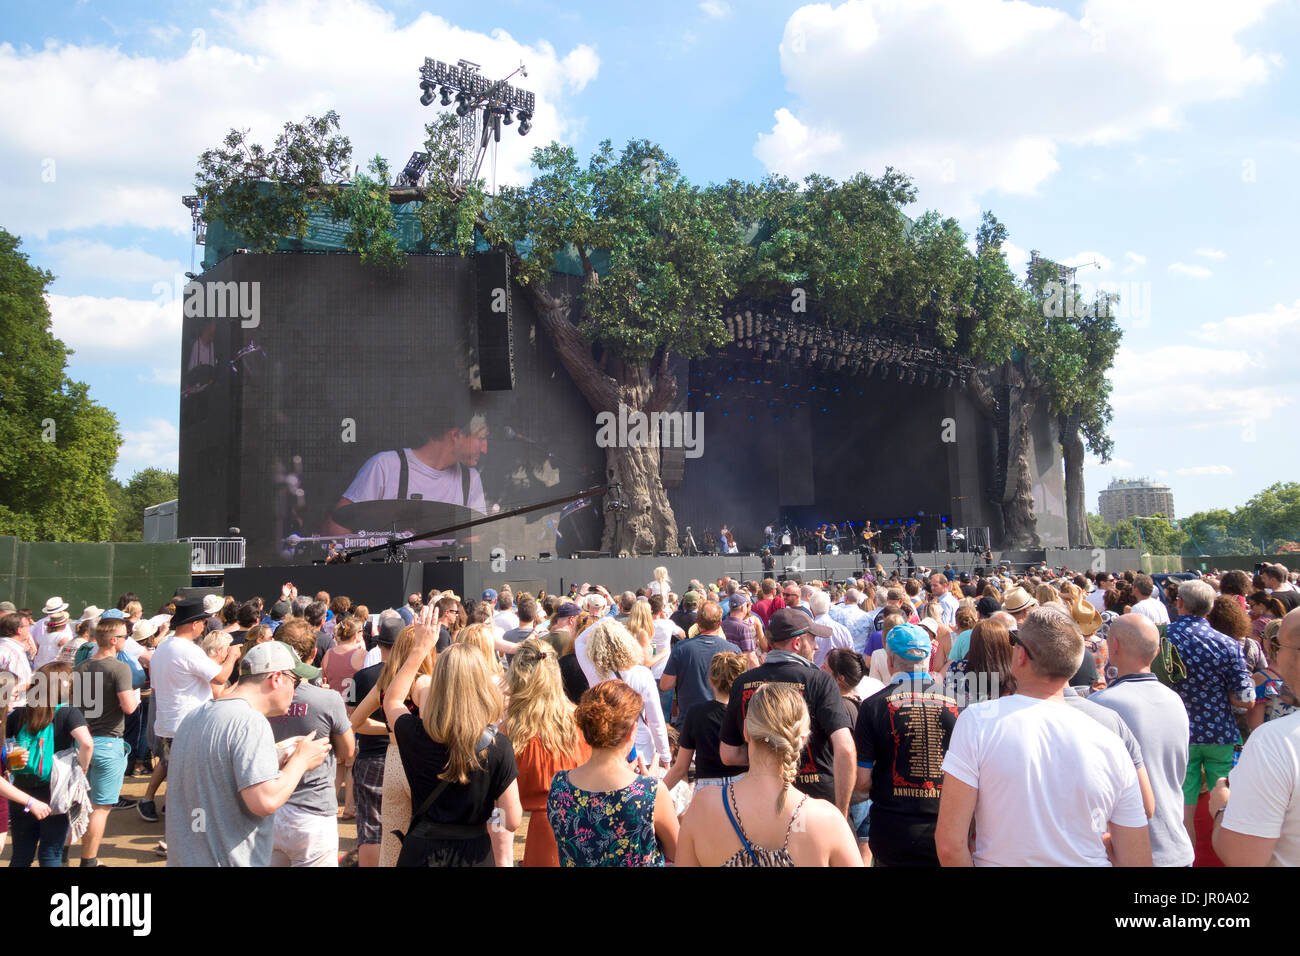 The Lumineers appearing on the Great Oak stage, British Summer Time festival in Hyde Park, London UK 2017 Stock Photo